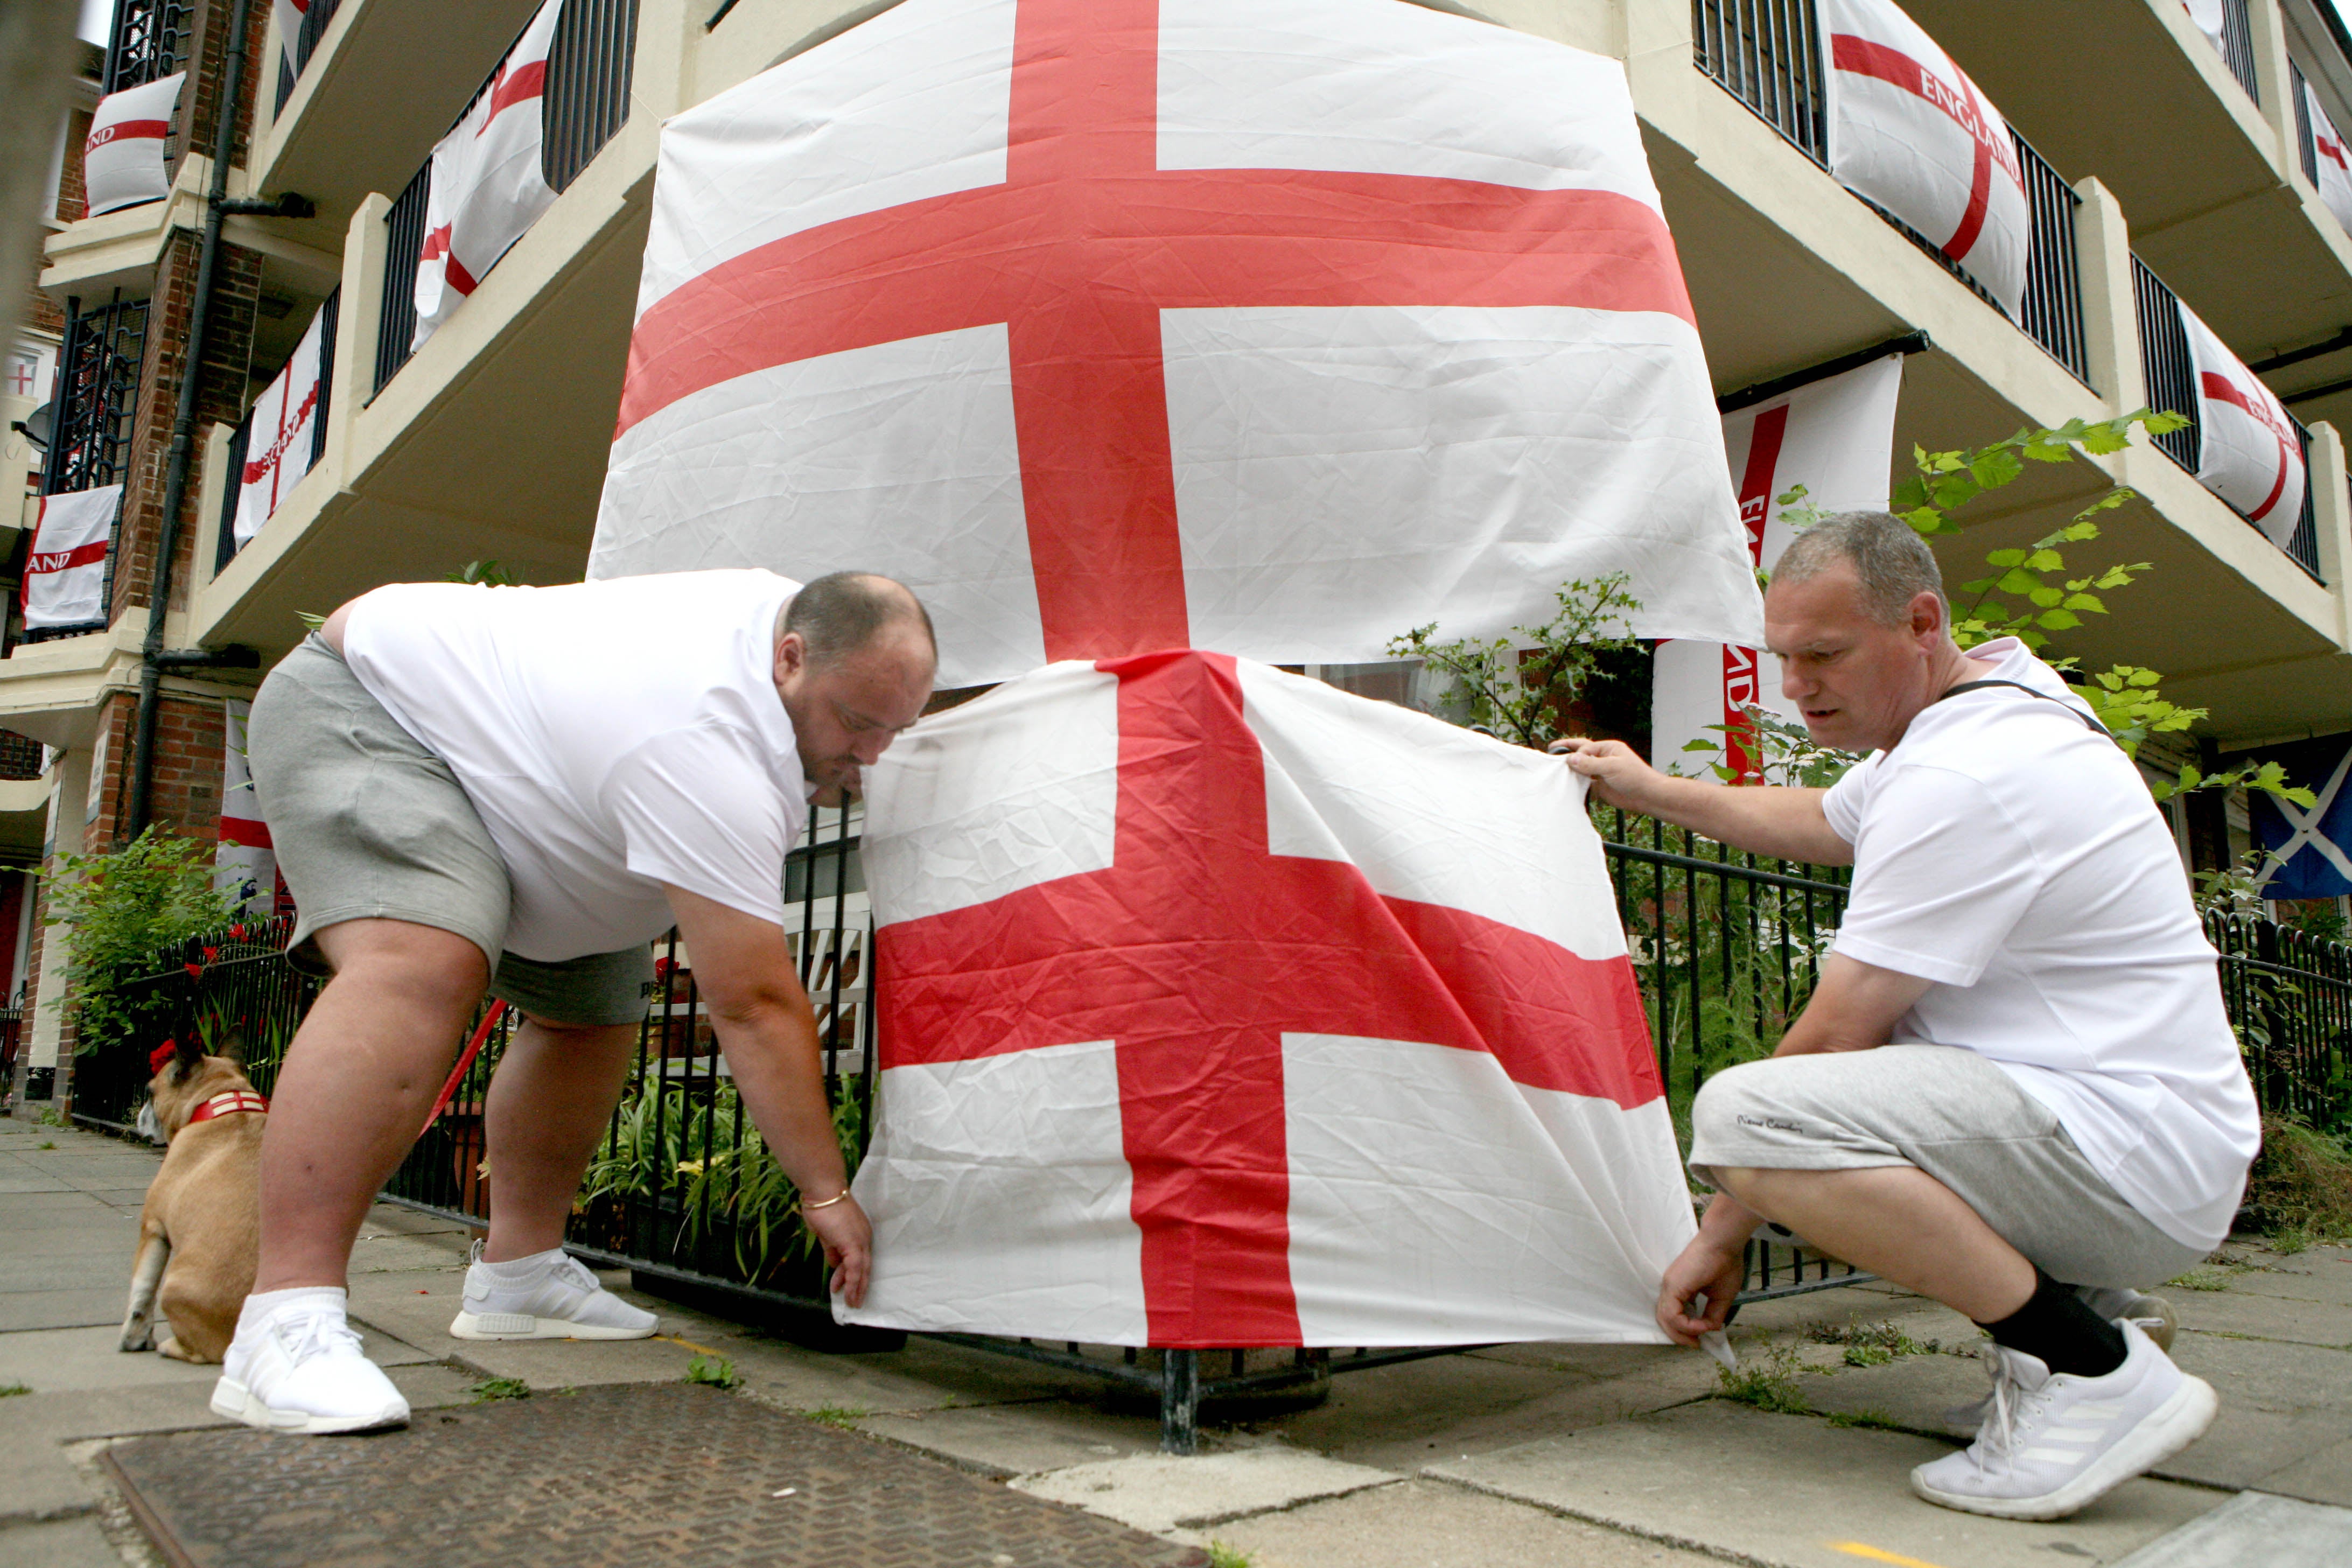 Chris Dowse (left) and Alan Putman, secure a flag on the Kirby Estate in Bermondsey, south London (Luciana Guerra/AP)